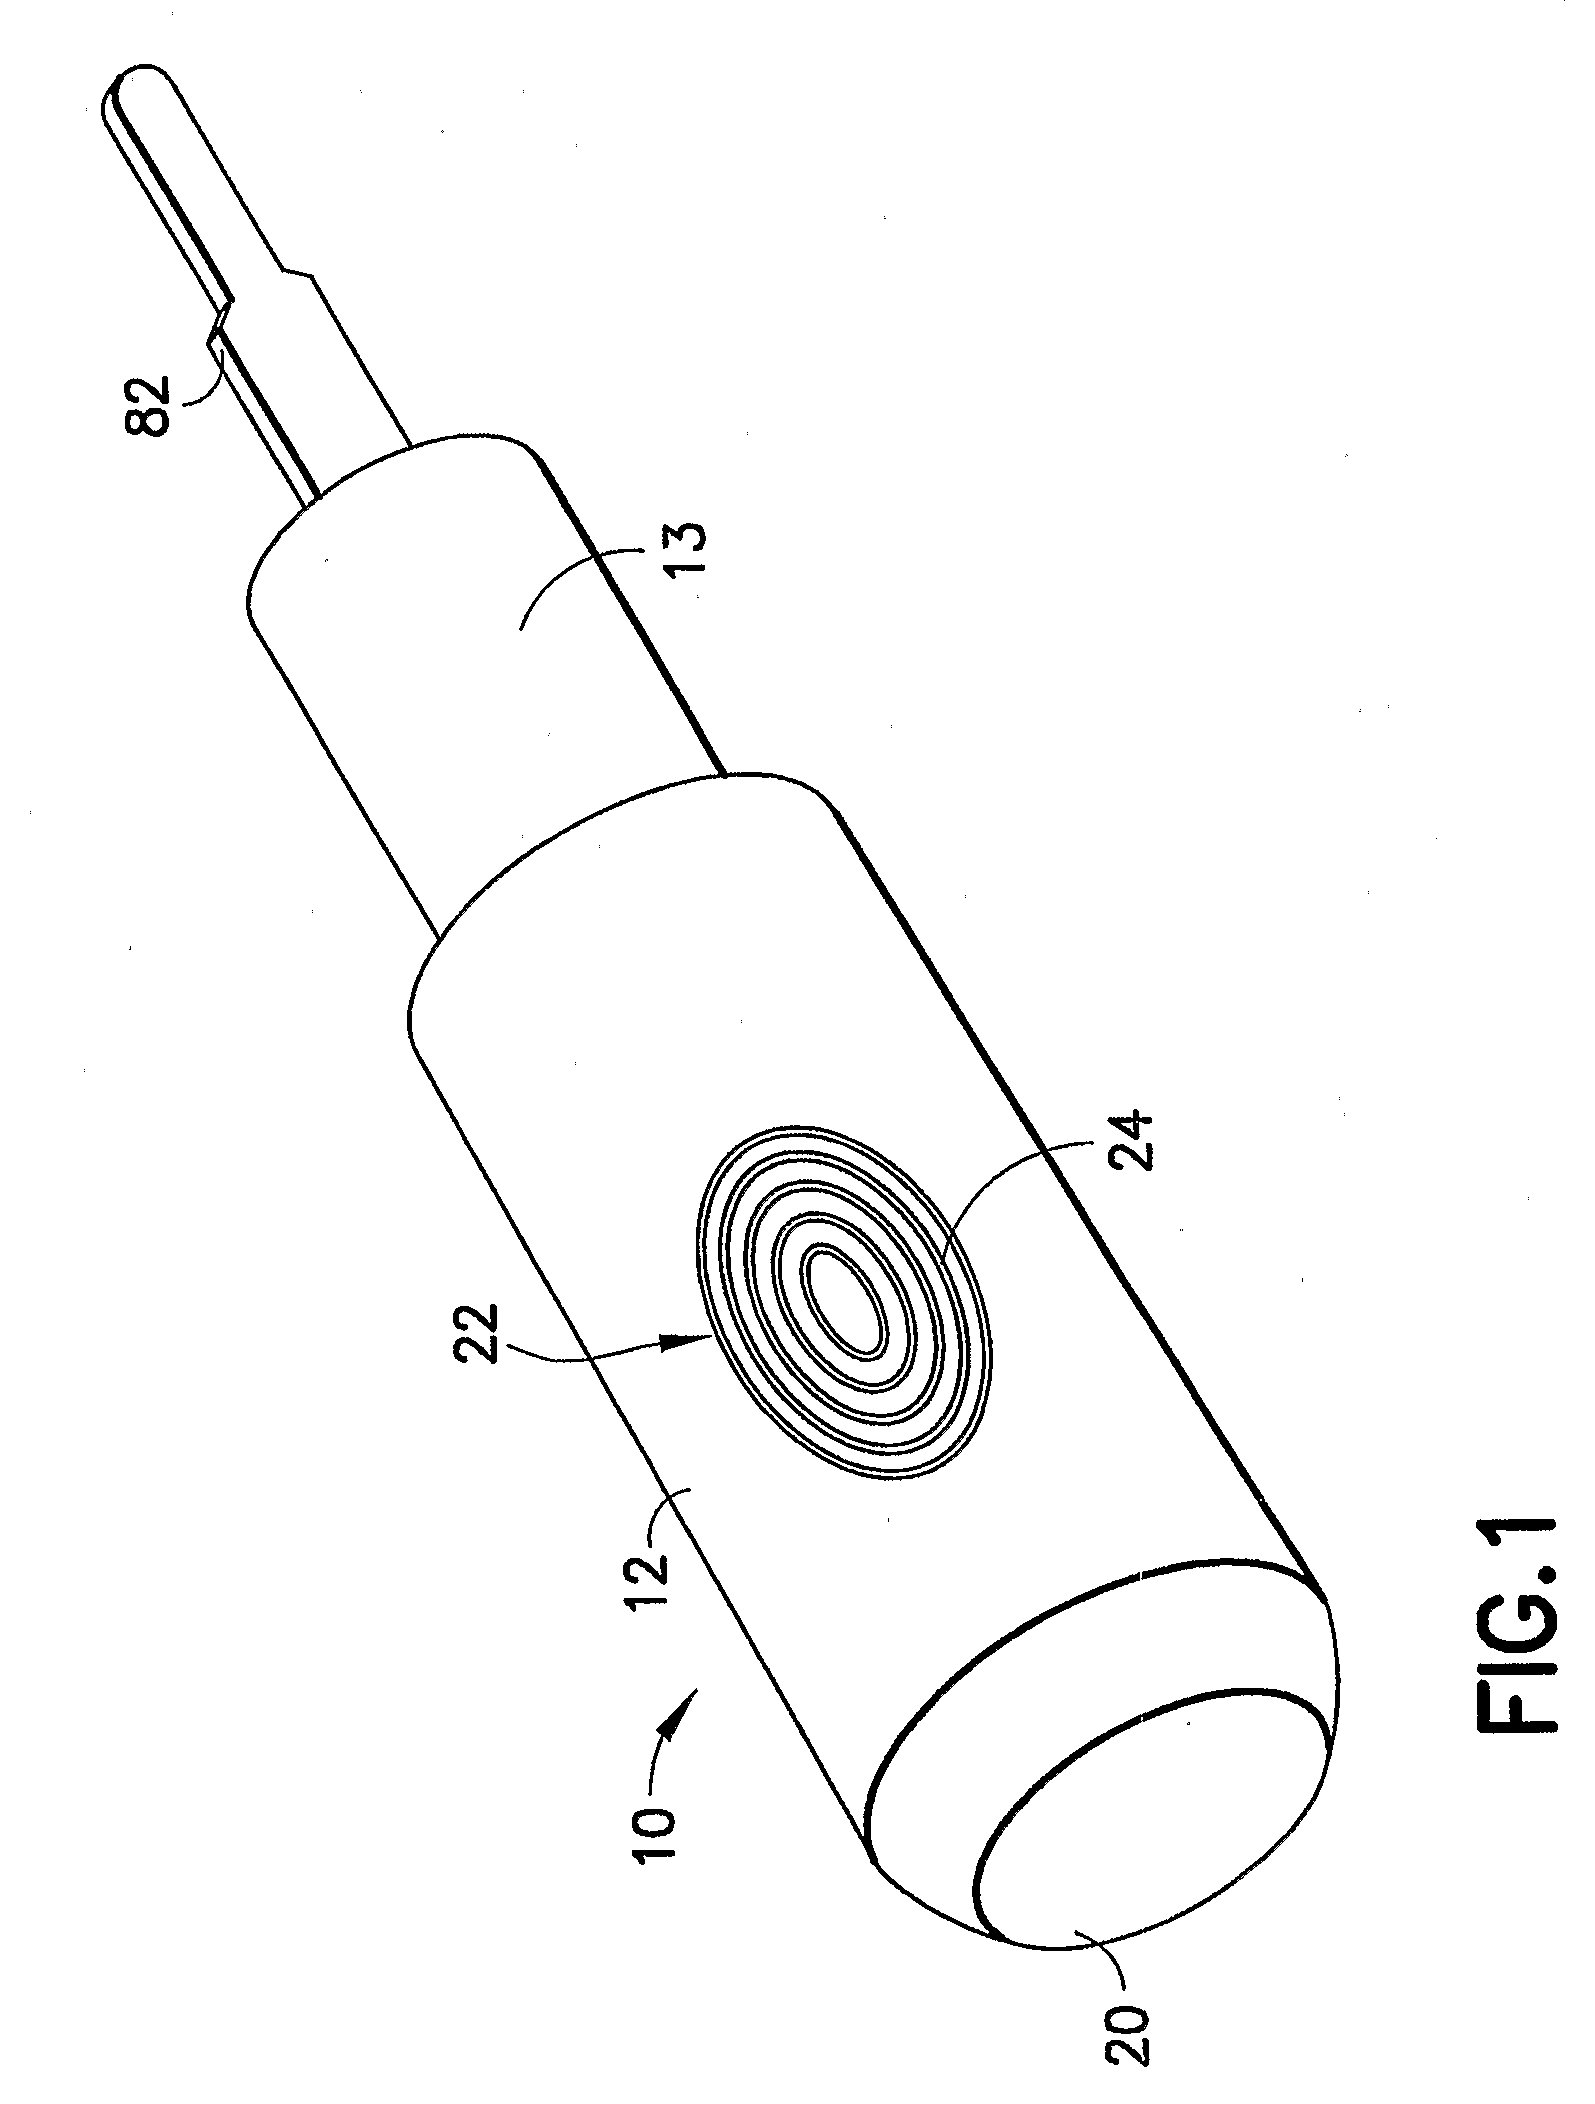 Rotary-actuated medical puncturing device